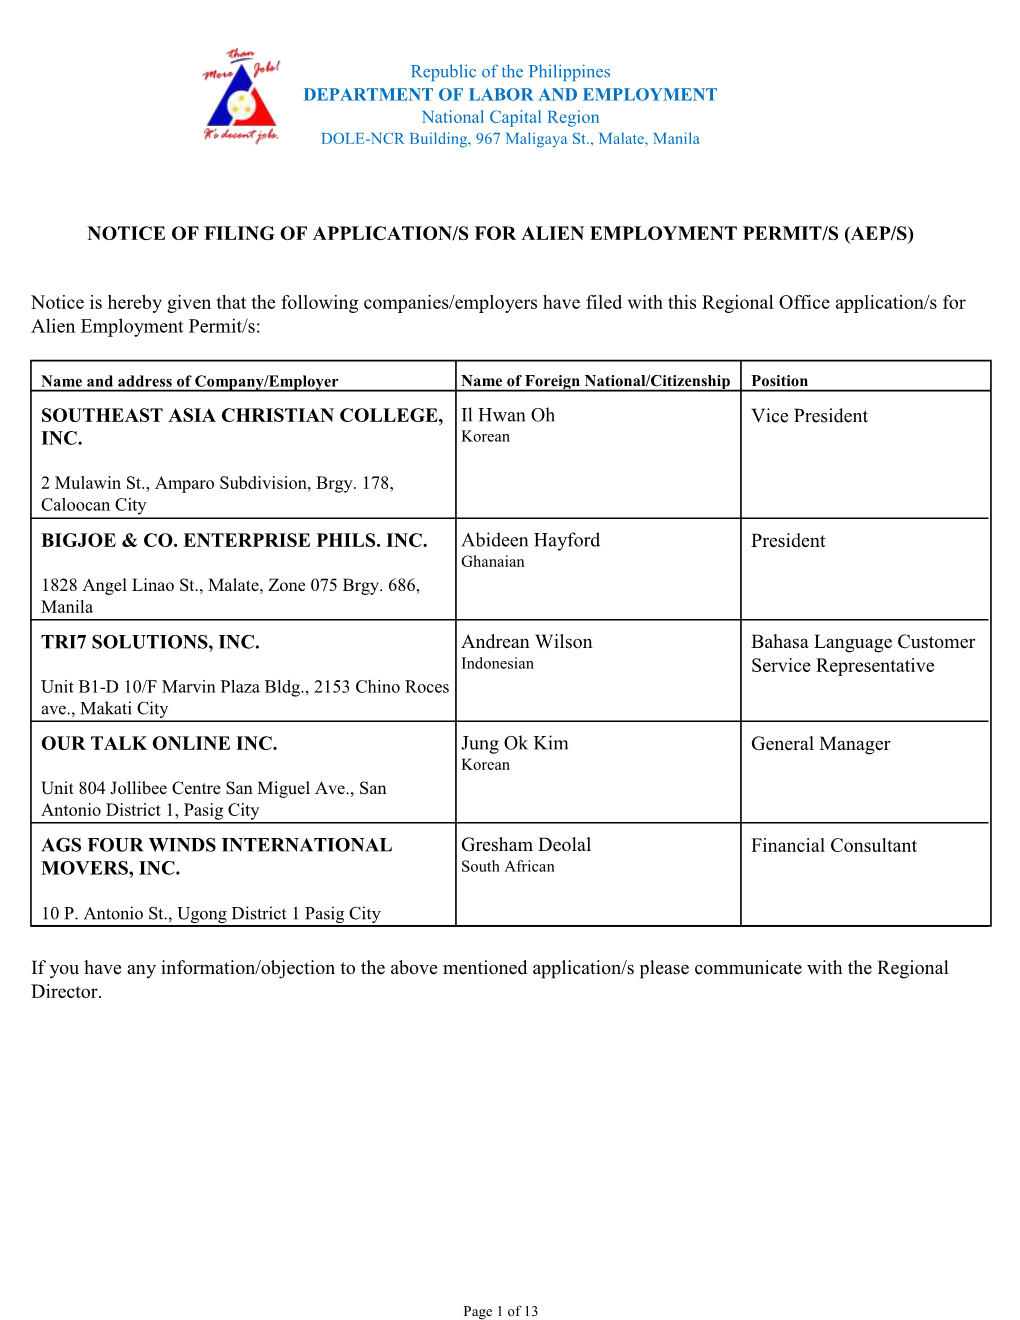 (AEP/S) Notice Is Hereby Given That the Following Companies/Empl